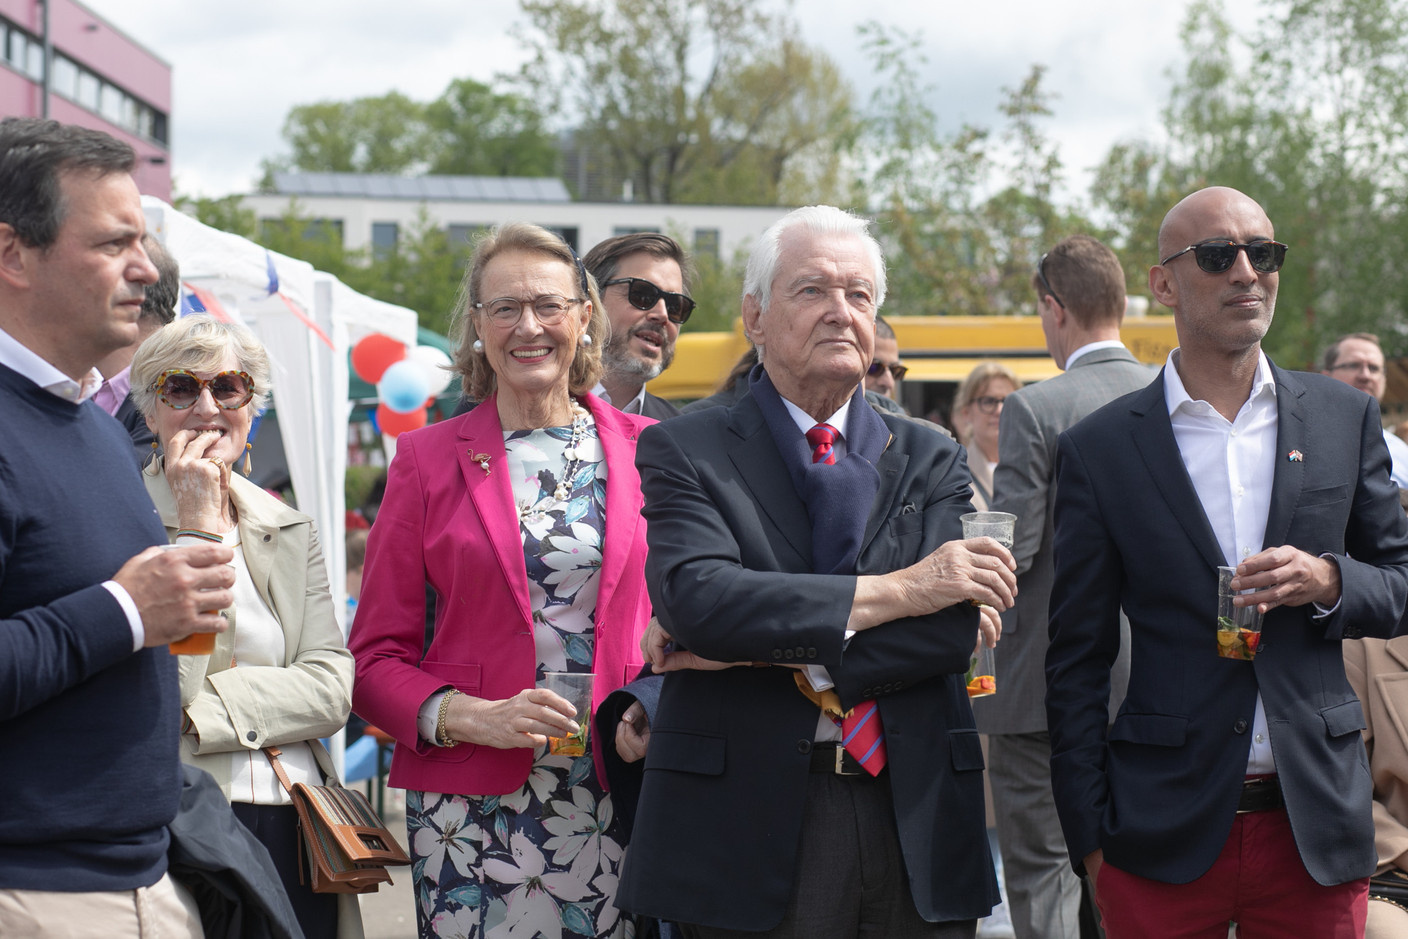 Marie-Hélène Ehrke-Harf, seen during a viewing of the coronation service of King Charles III and Queen Camilla at St George’s International School in Luxembourg, 6 May 2023. Photo: Matic Zorman / Maison Moderne